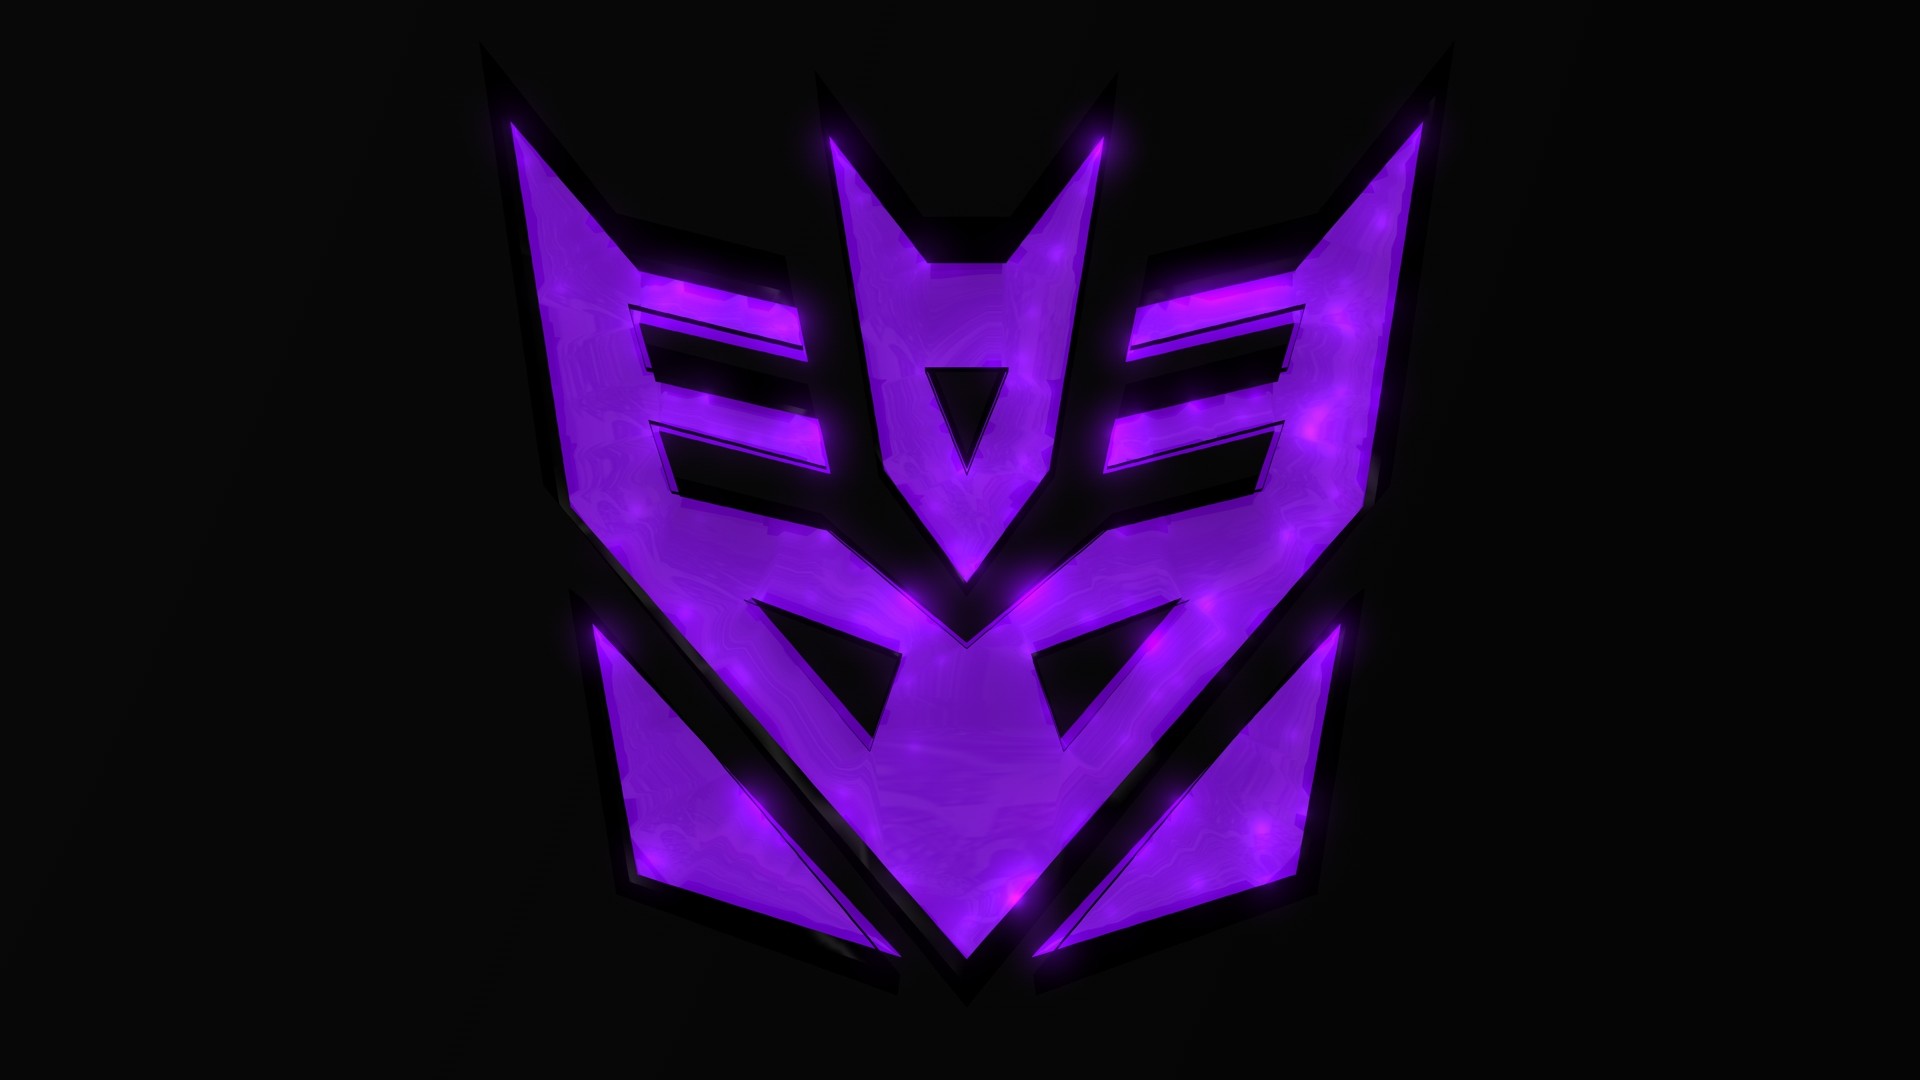 Decepticon Insignia 1 by 100SeedlessPenguins Decepticon Insignia 1 by 100SeedlessPenguins